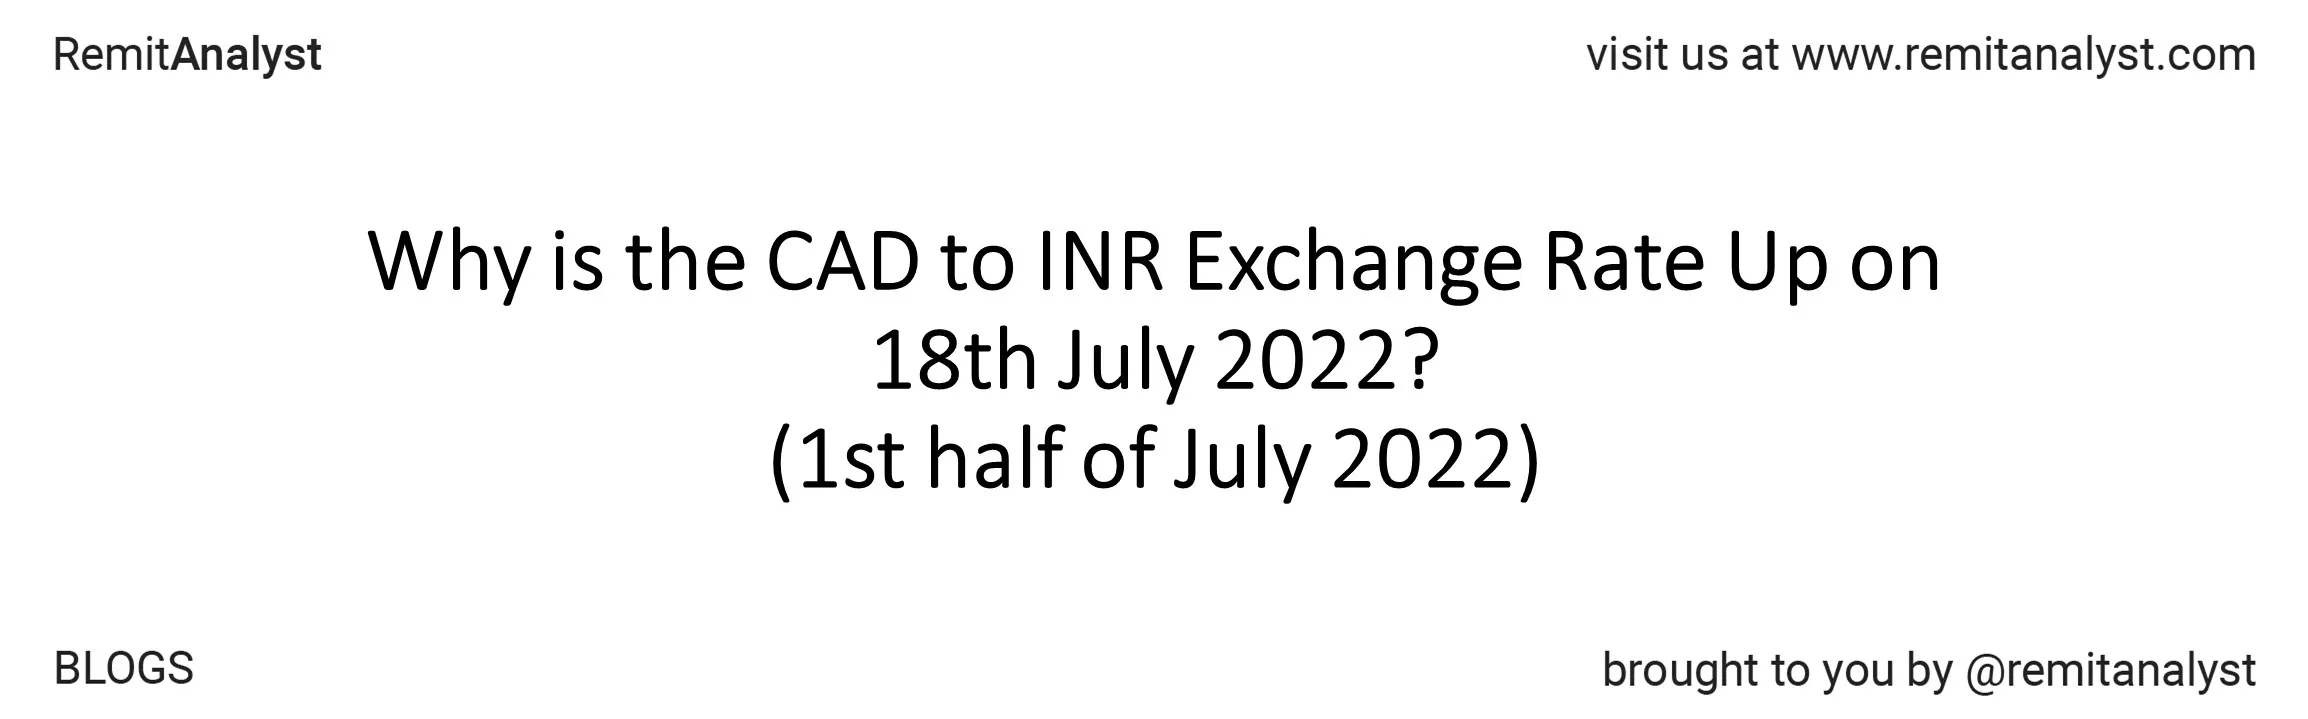 cad-to-inr-exchange-rate-4-july-2022-to-18-july-2022-title